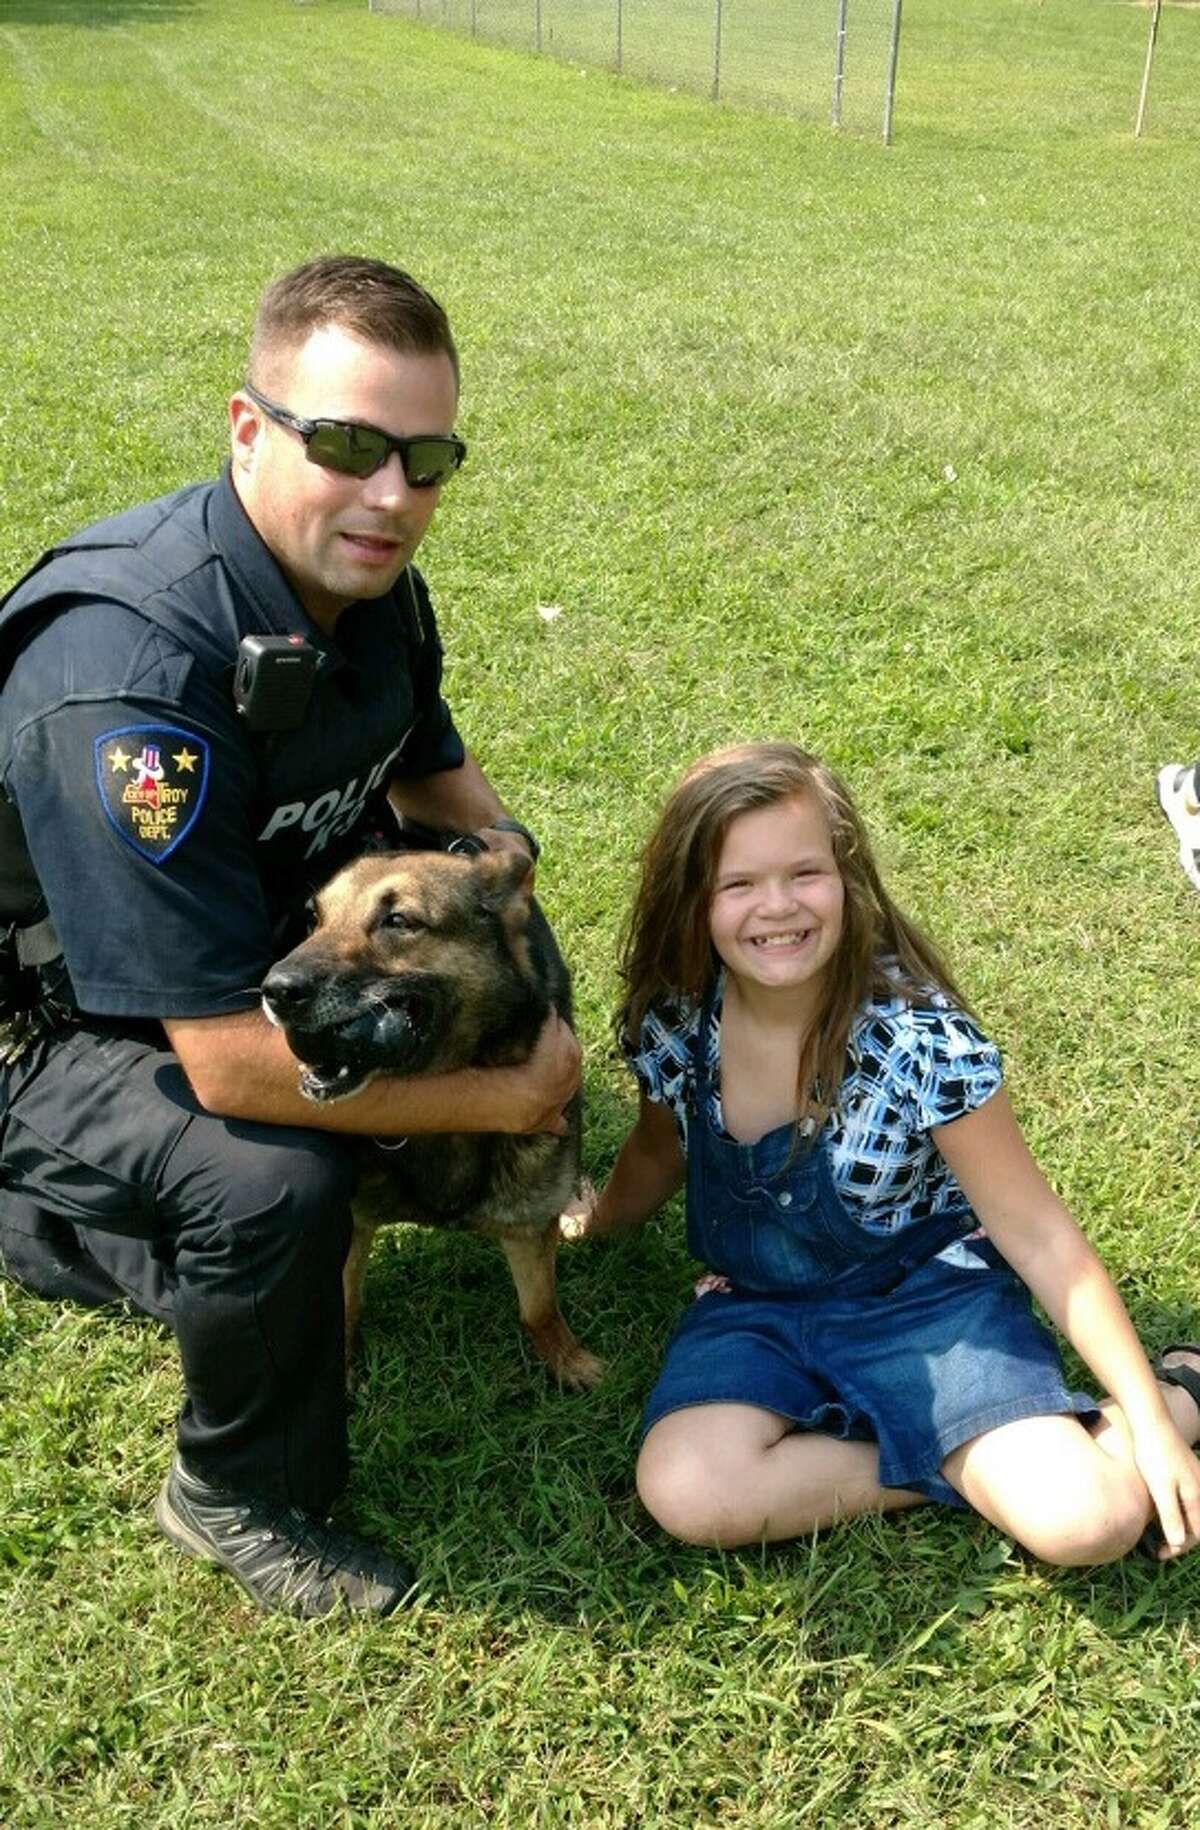 Troy Canine Officer Kyle Jones, K9 Blair and the located missing person. (Courtesy Troy Police Department)